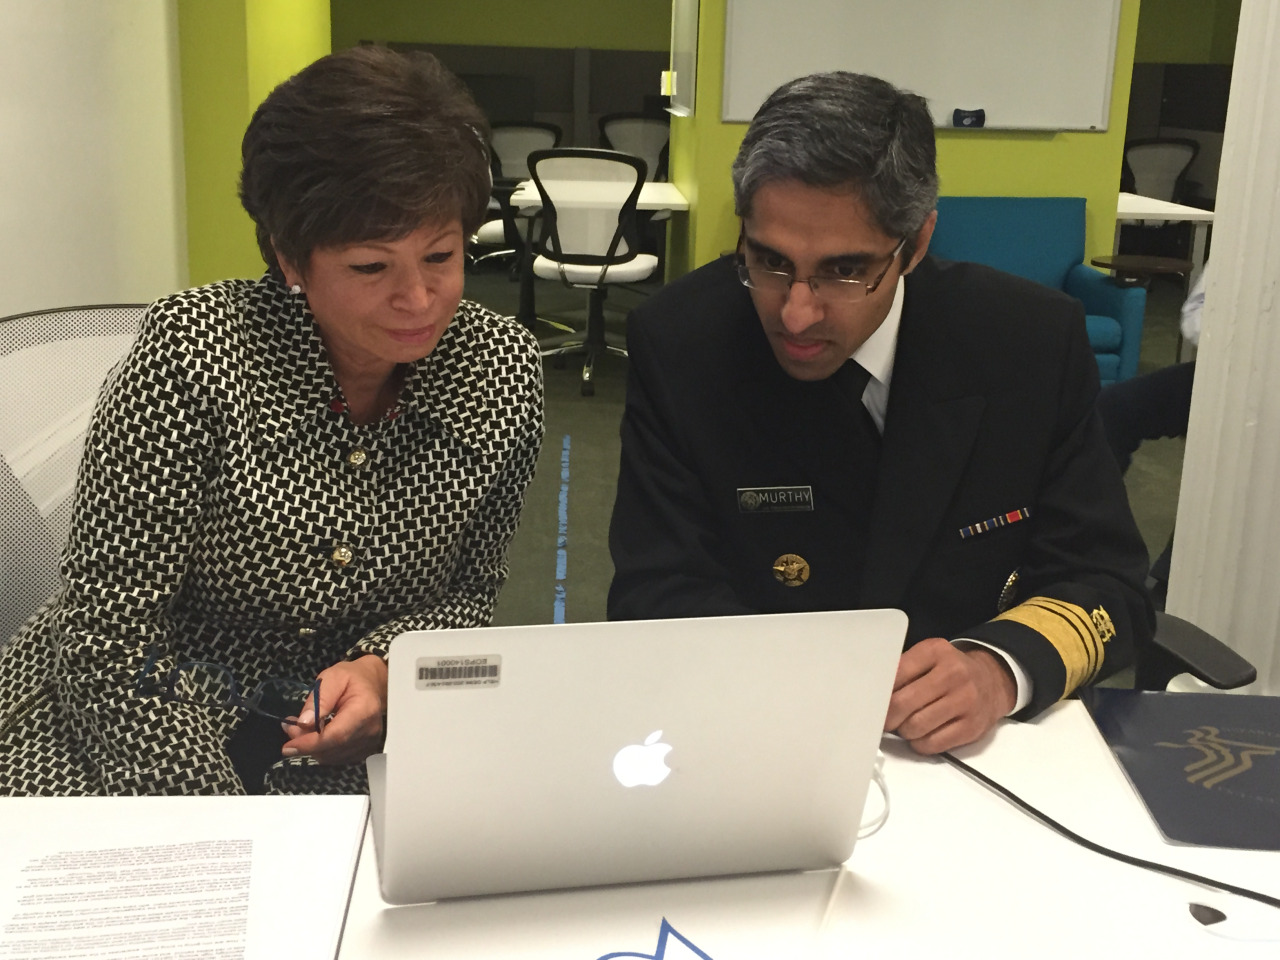 Tumblr Q&A With Surgeon General and Valerie Jarrett_April 2015